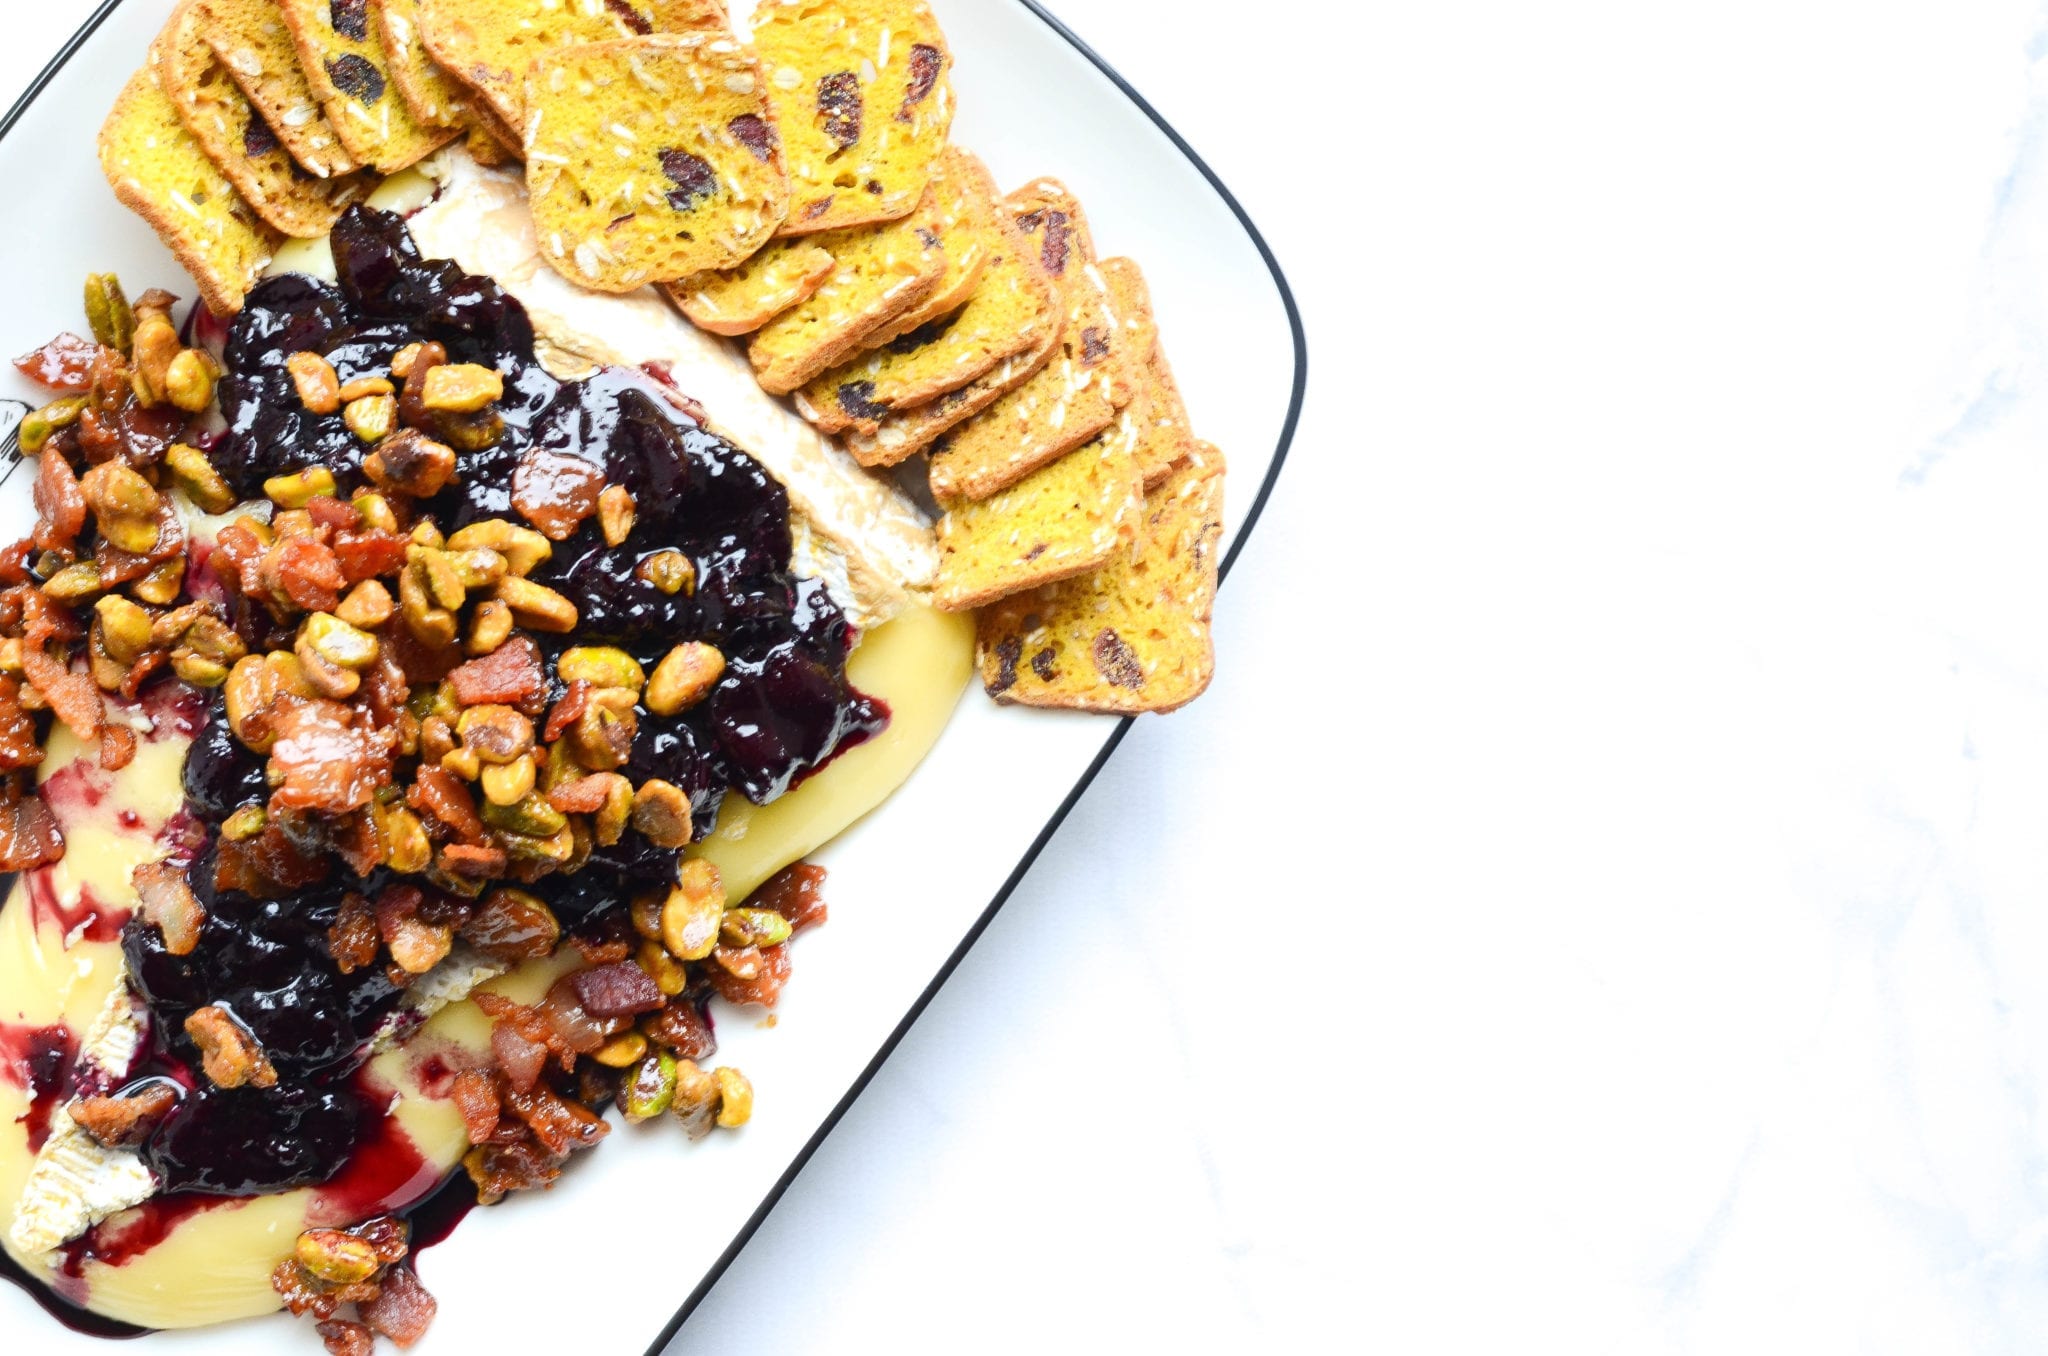 Baked Brie With Red Wine Cherries, Candied Bacon and Pistachios